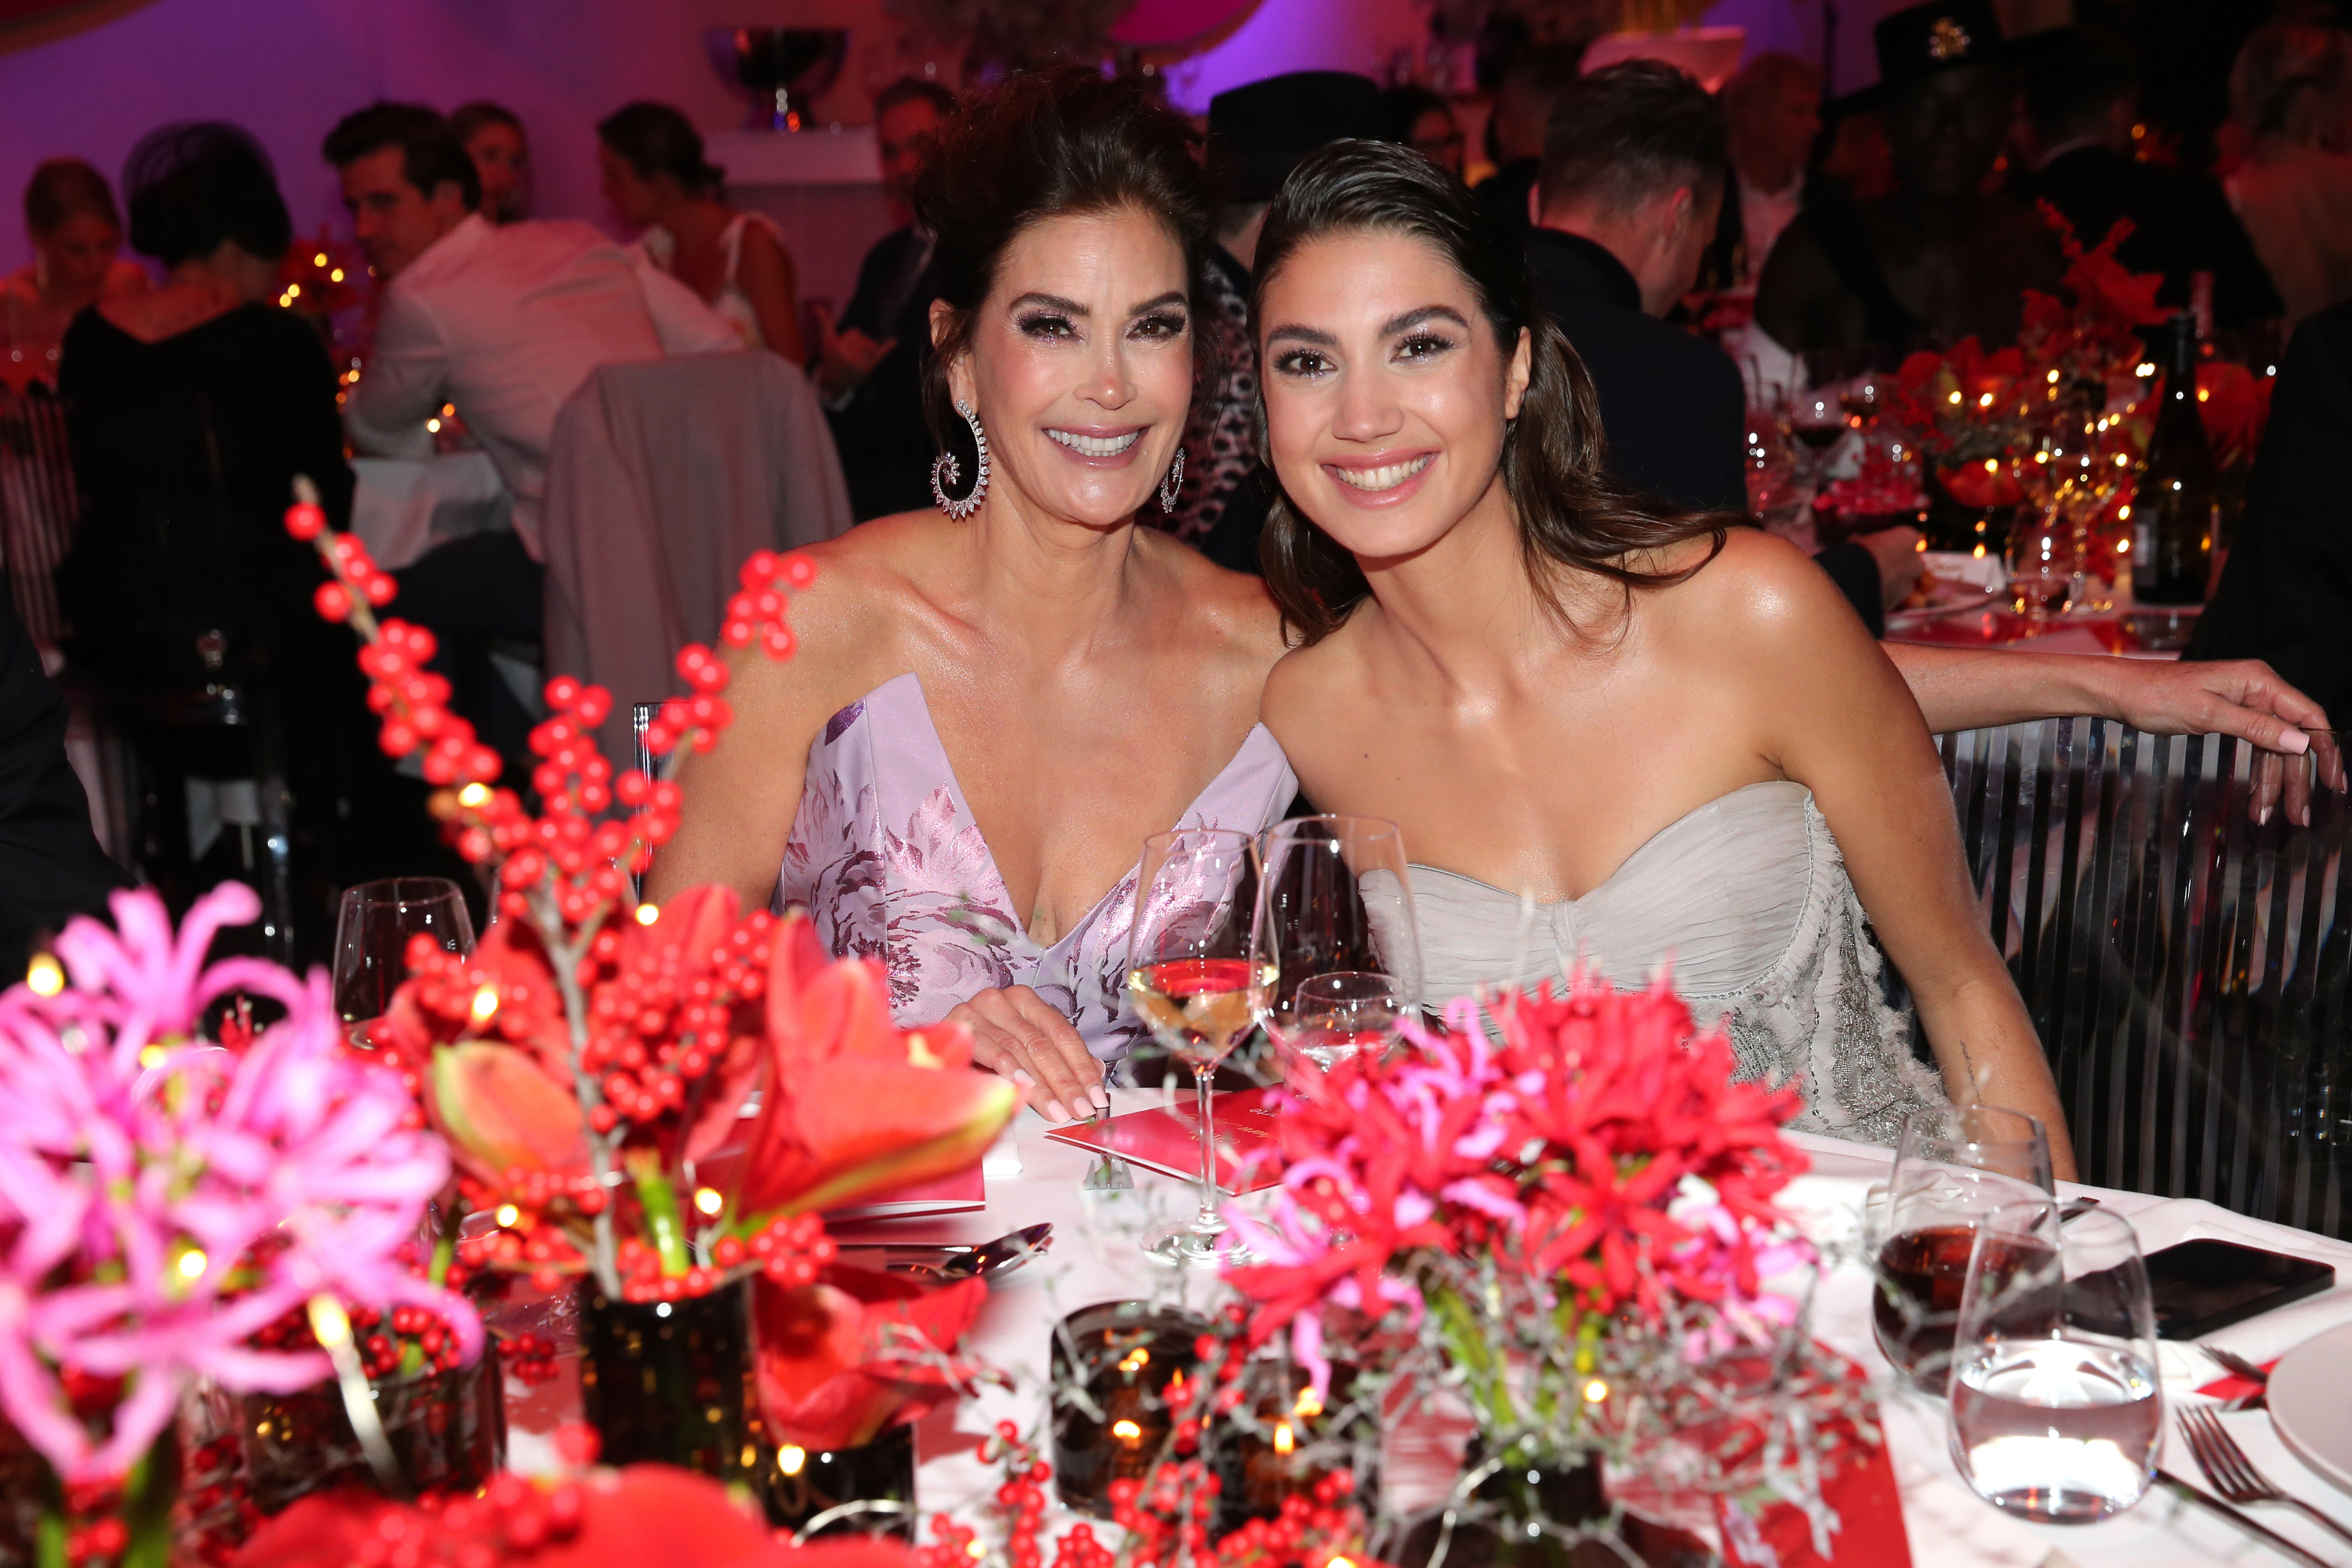 Teri Hatcher and Emerson Tenney in Munich, Germany, on November 30, 2022 | Source: Getty Images